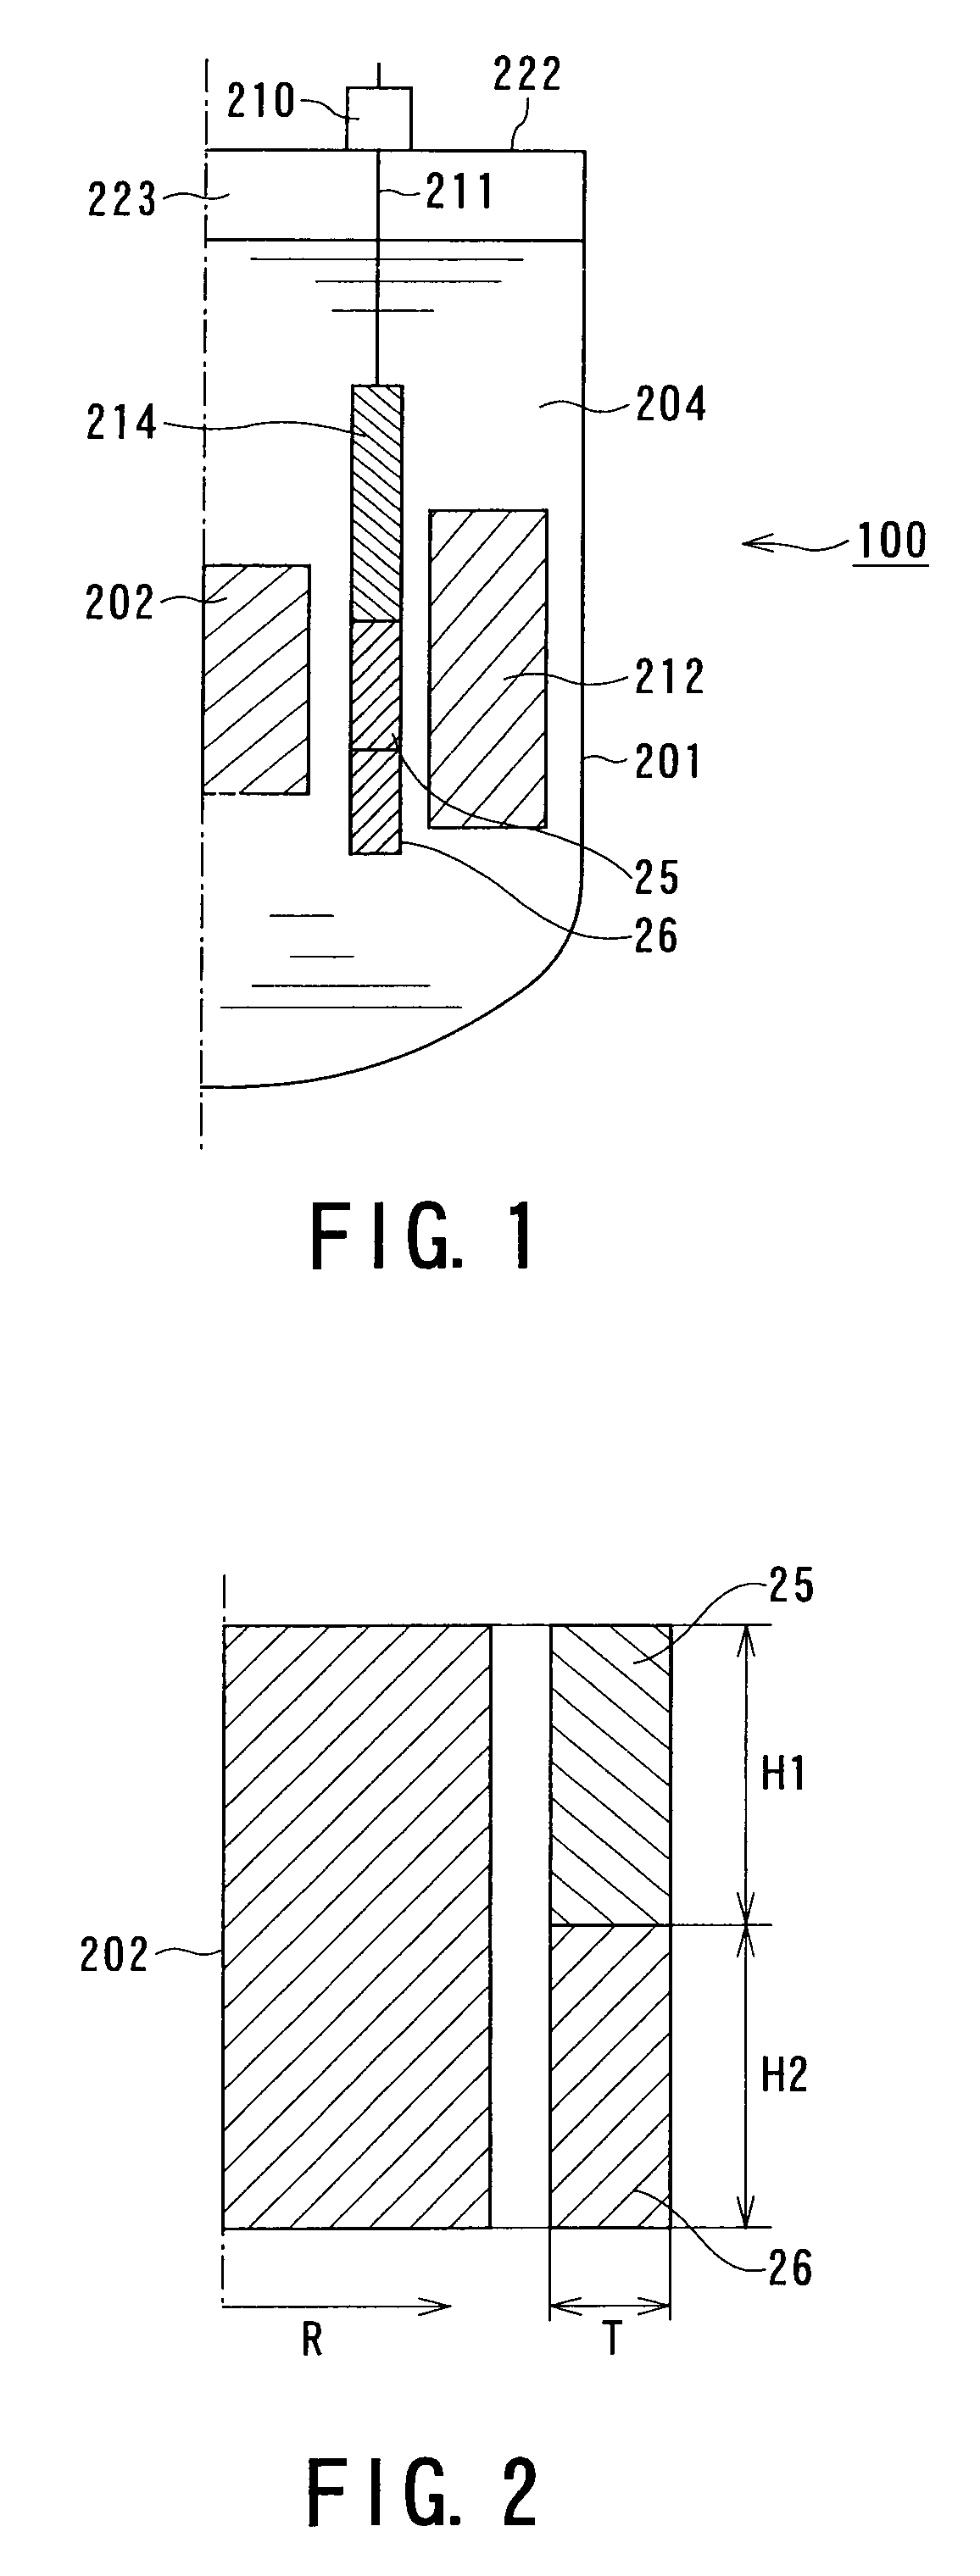 Fast reactor having reflector control system and neutron reflector thereof